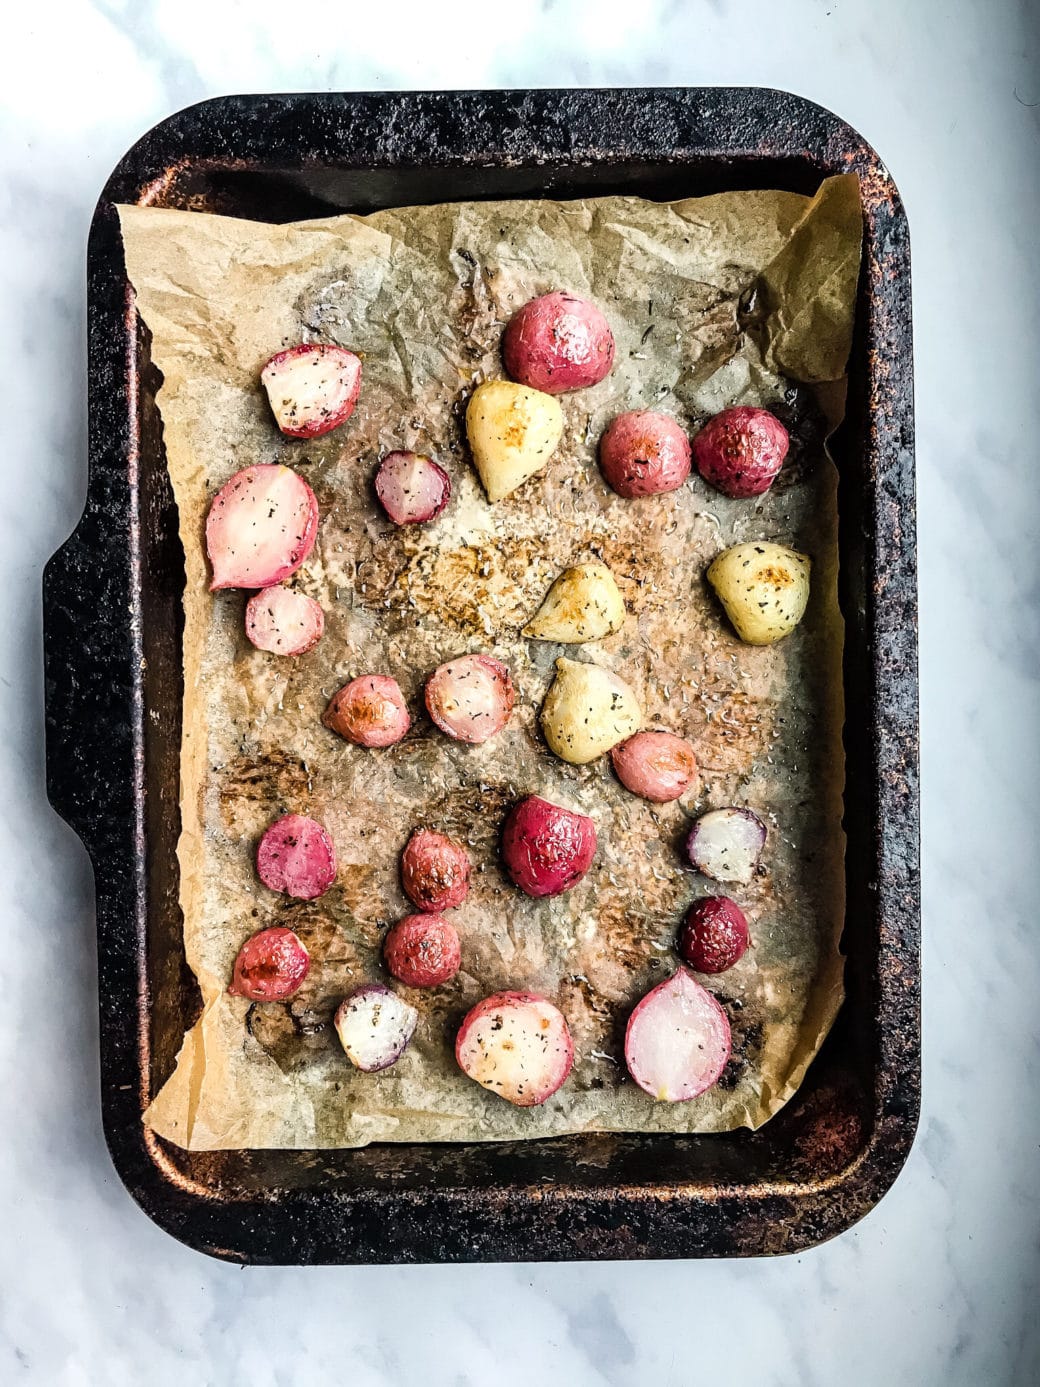 radishes that have been sliced in half and roasted in olive oil, salt, and dried rosemary resting on a prepared baking sheet